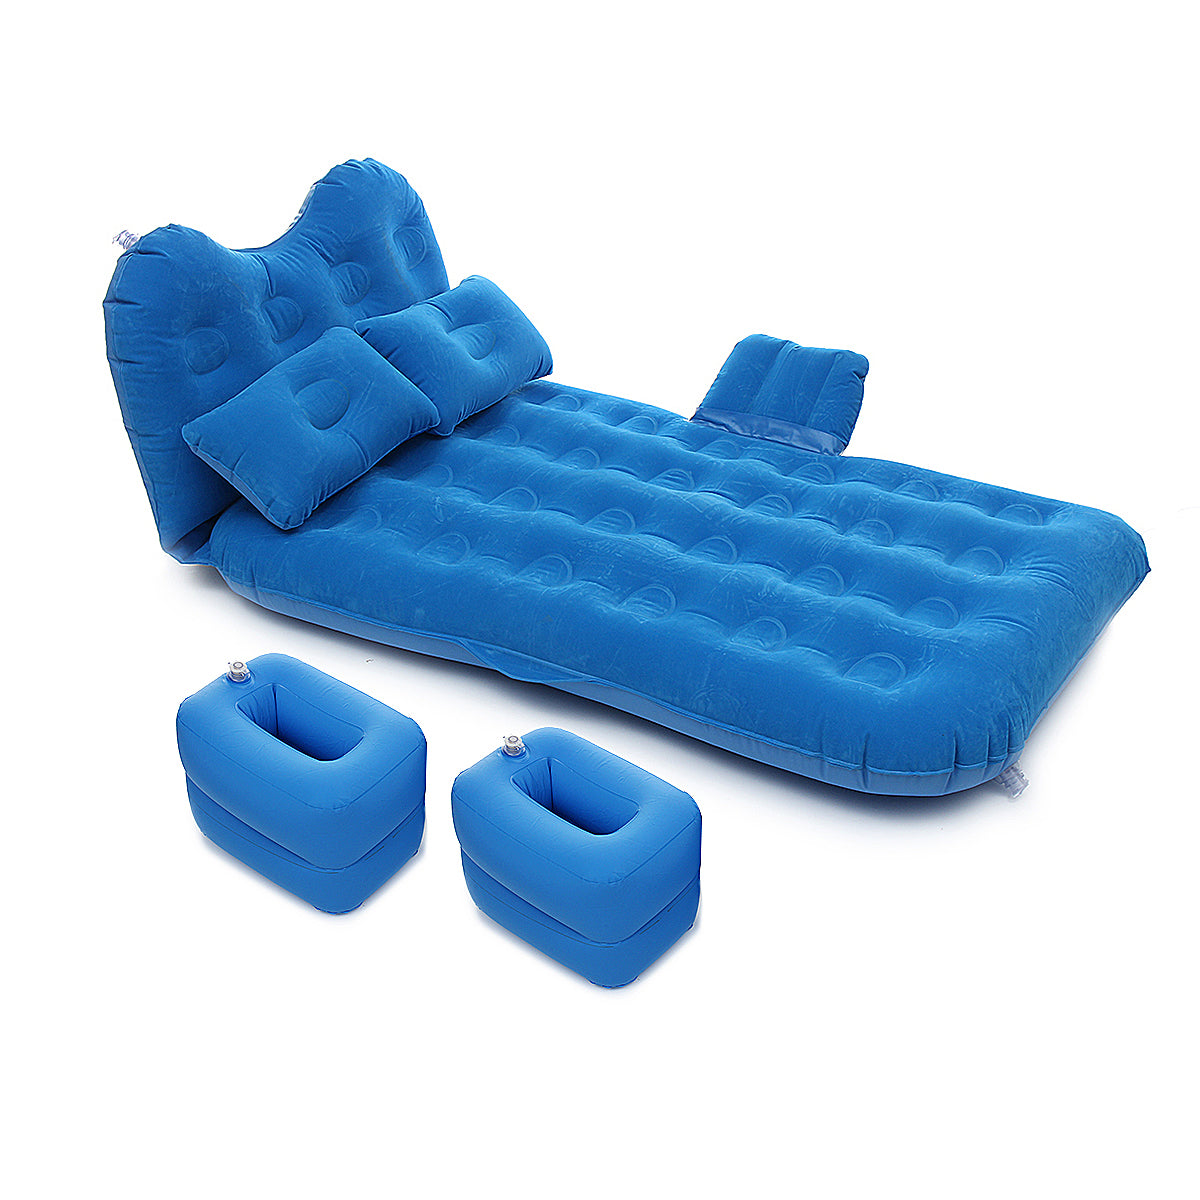 Steel Blue Car Travel Inflatable Air Mattress Back Seat Portable Camping Bed Cushion with Back Support